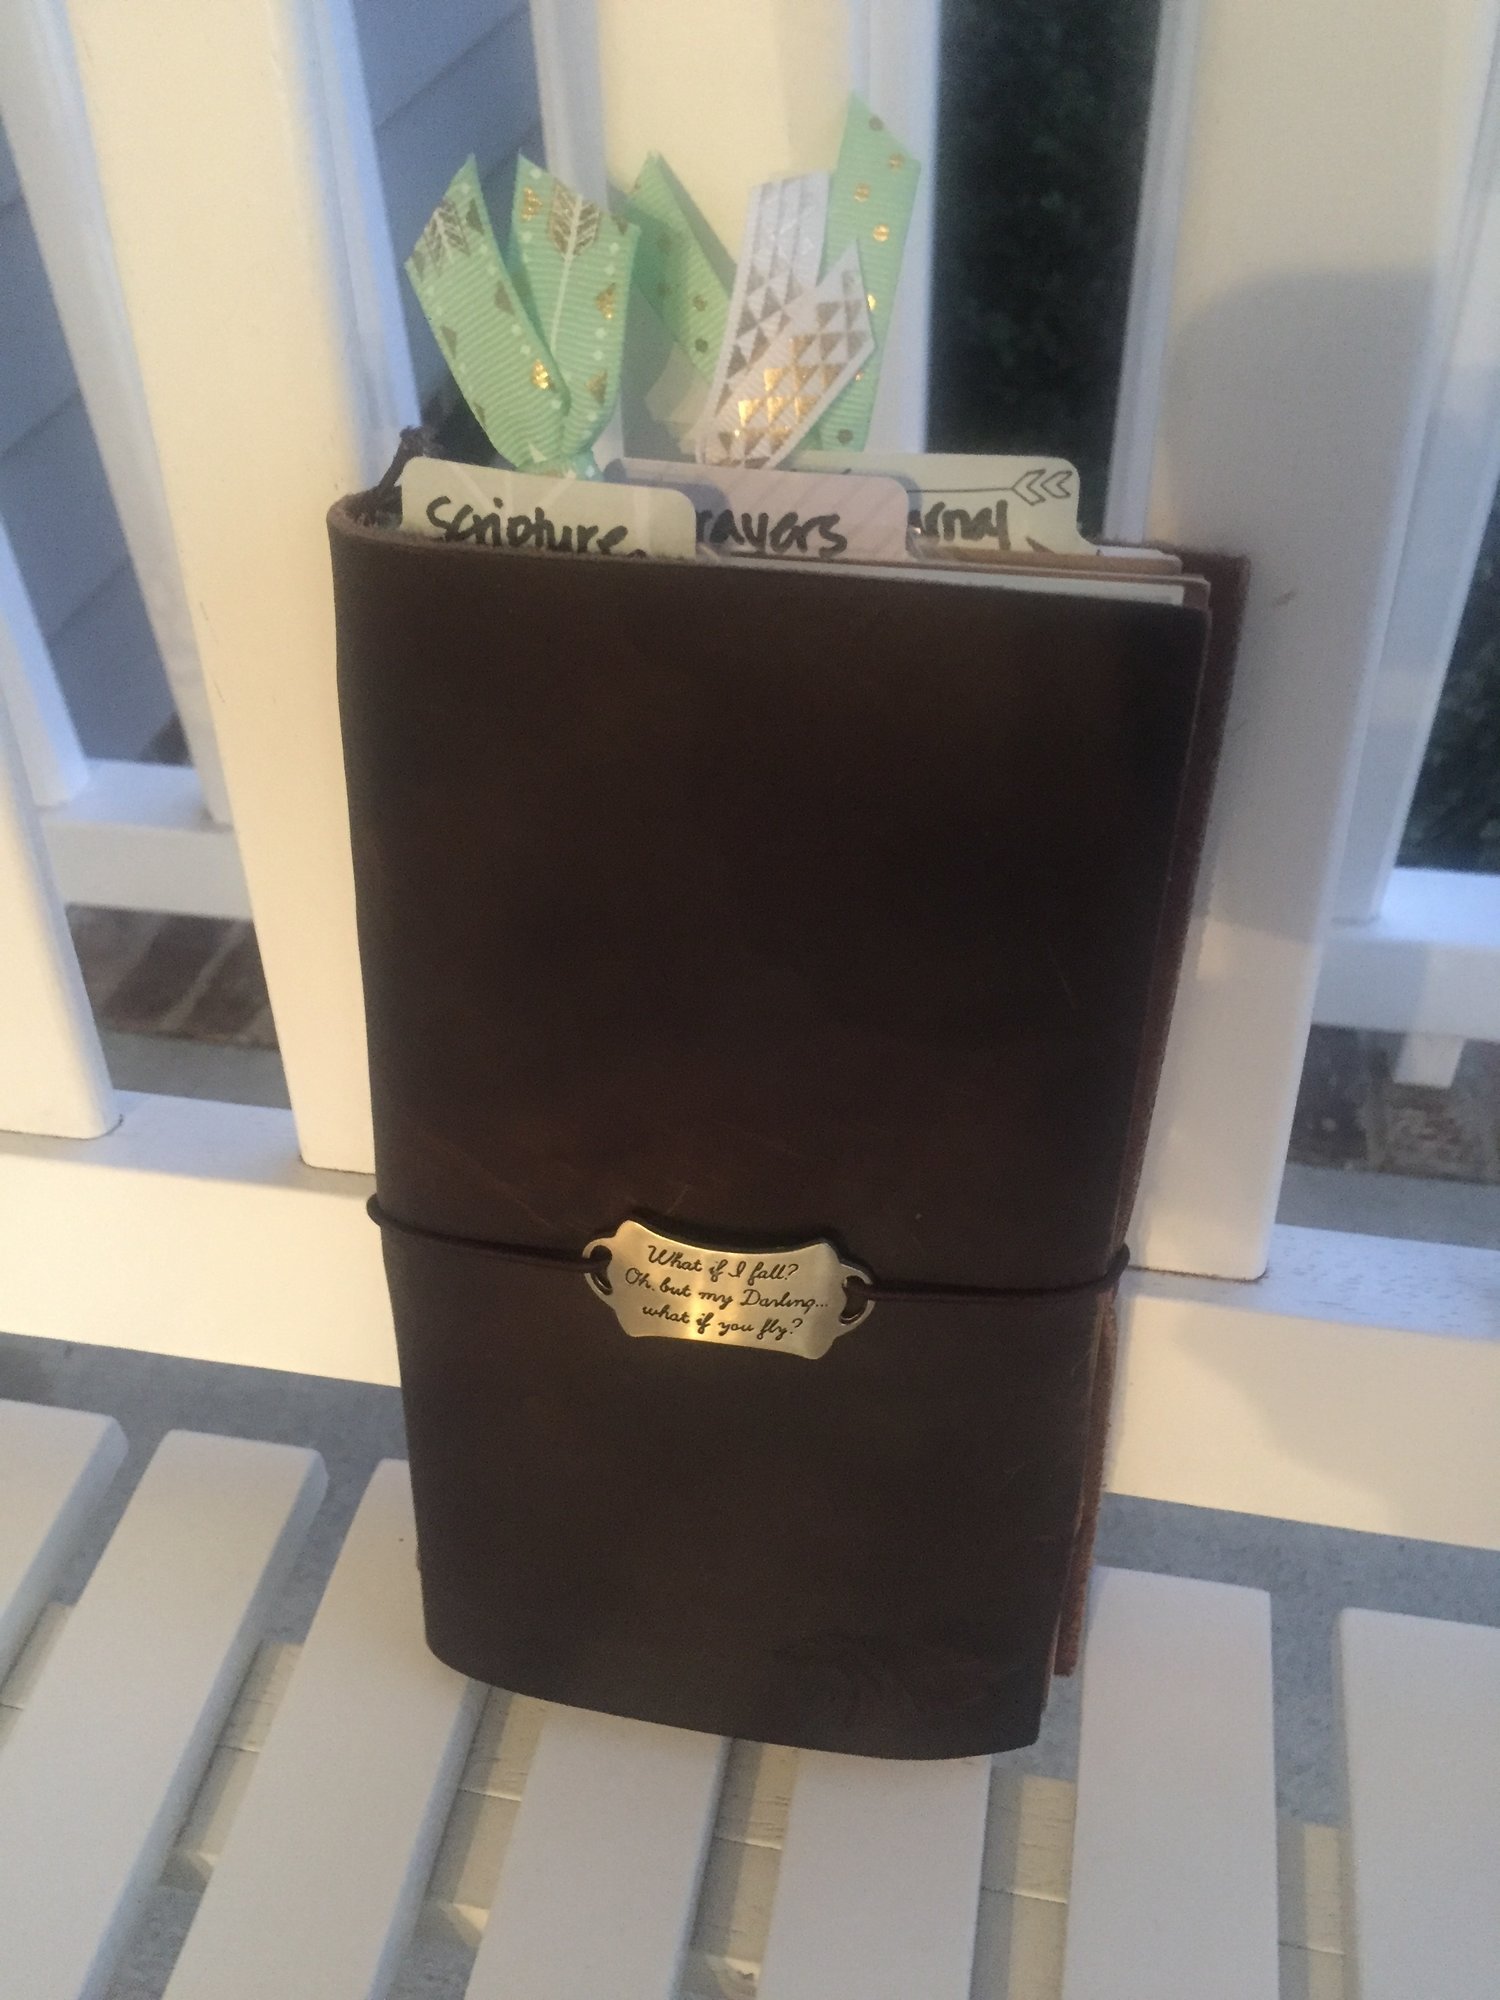 Leather journal with section labels such as Scripture and prayers